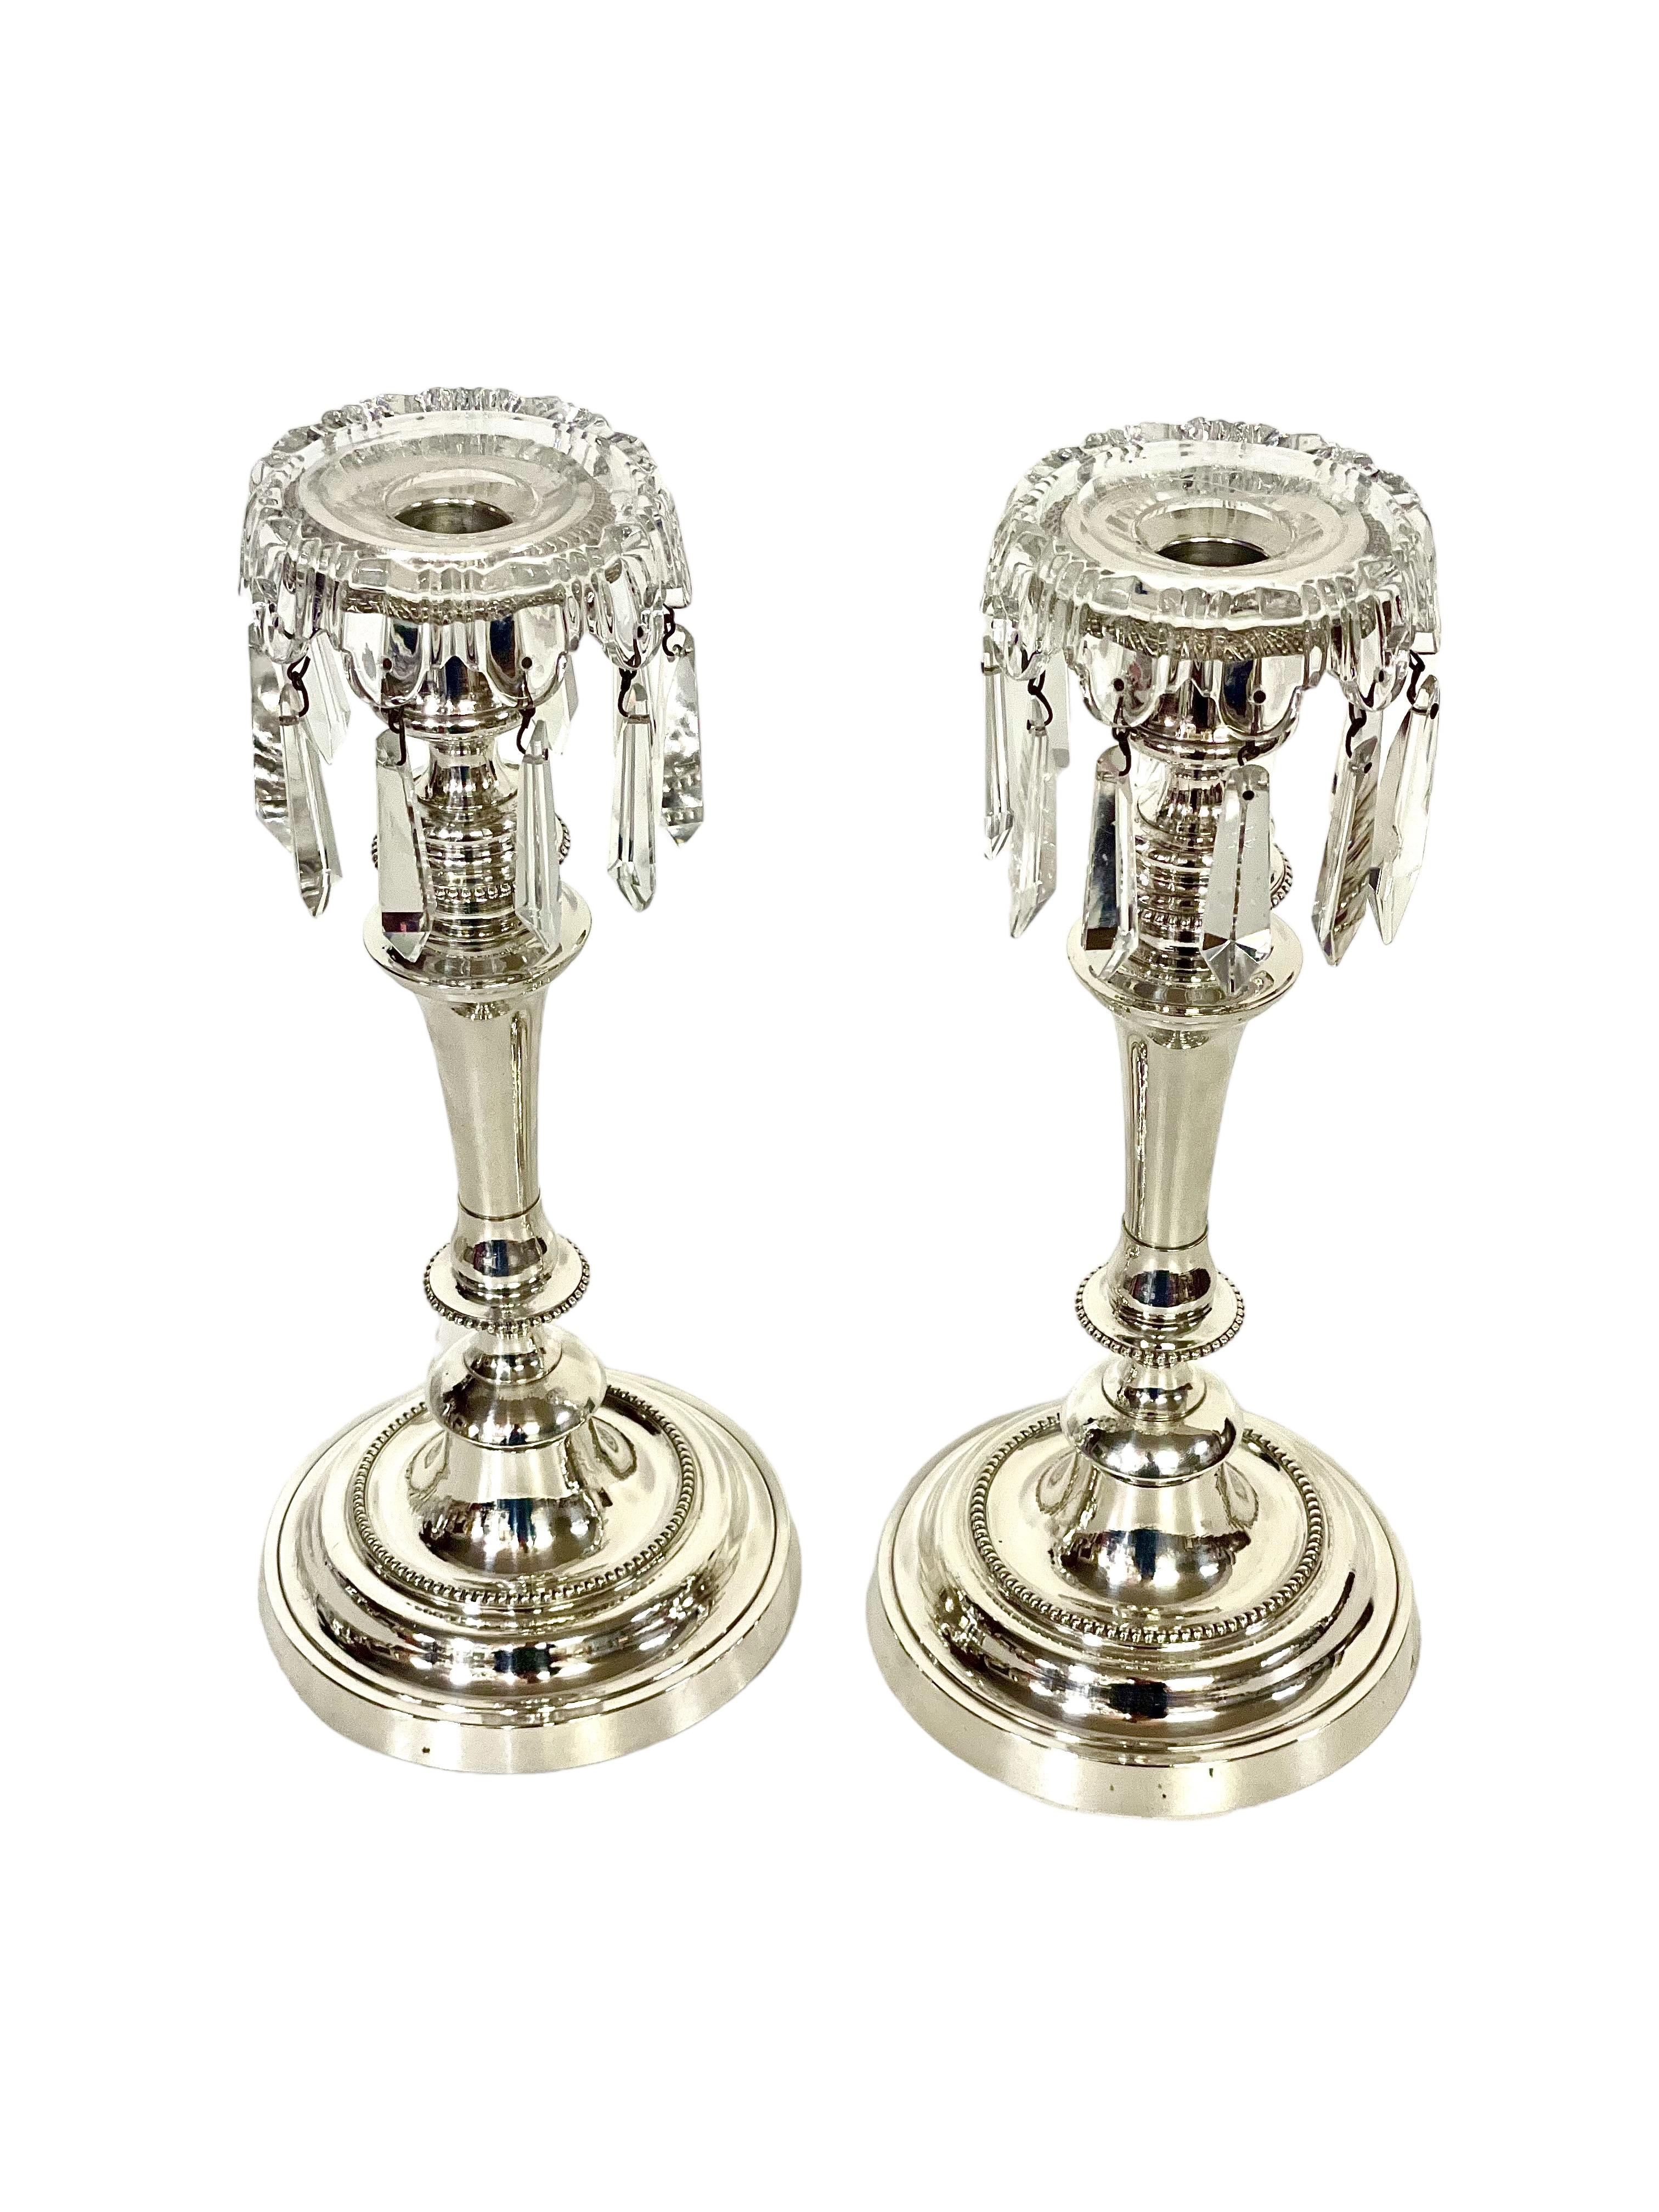 Louis XVI Style Pair of Silver Plated and Crystal Candle Holders by Morlot For Sale 7